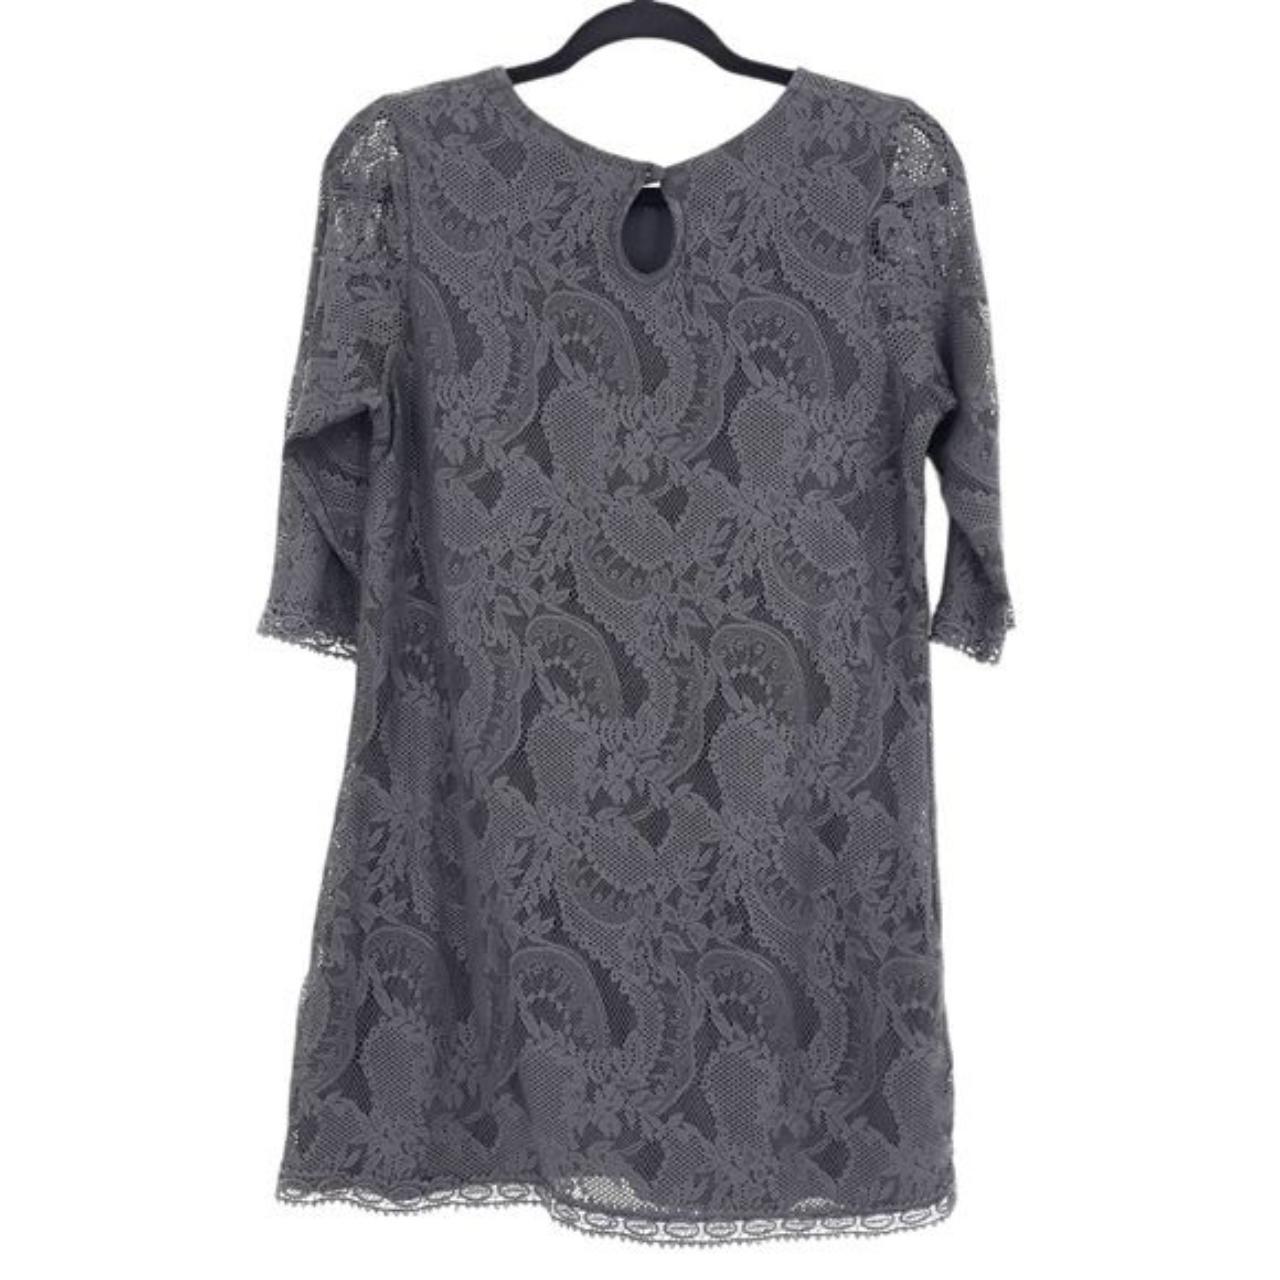 Product Image 4 - Cotton charcoal gray paisley lace